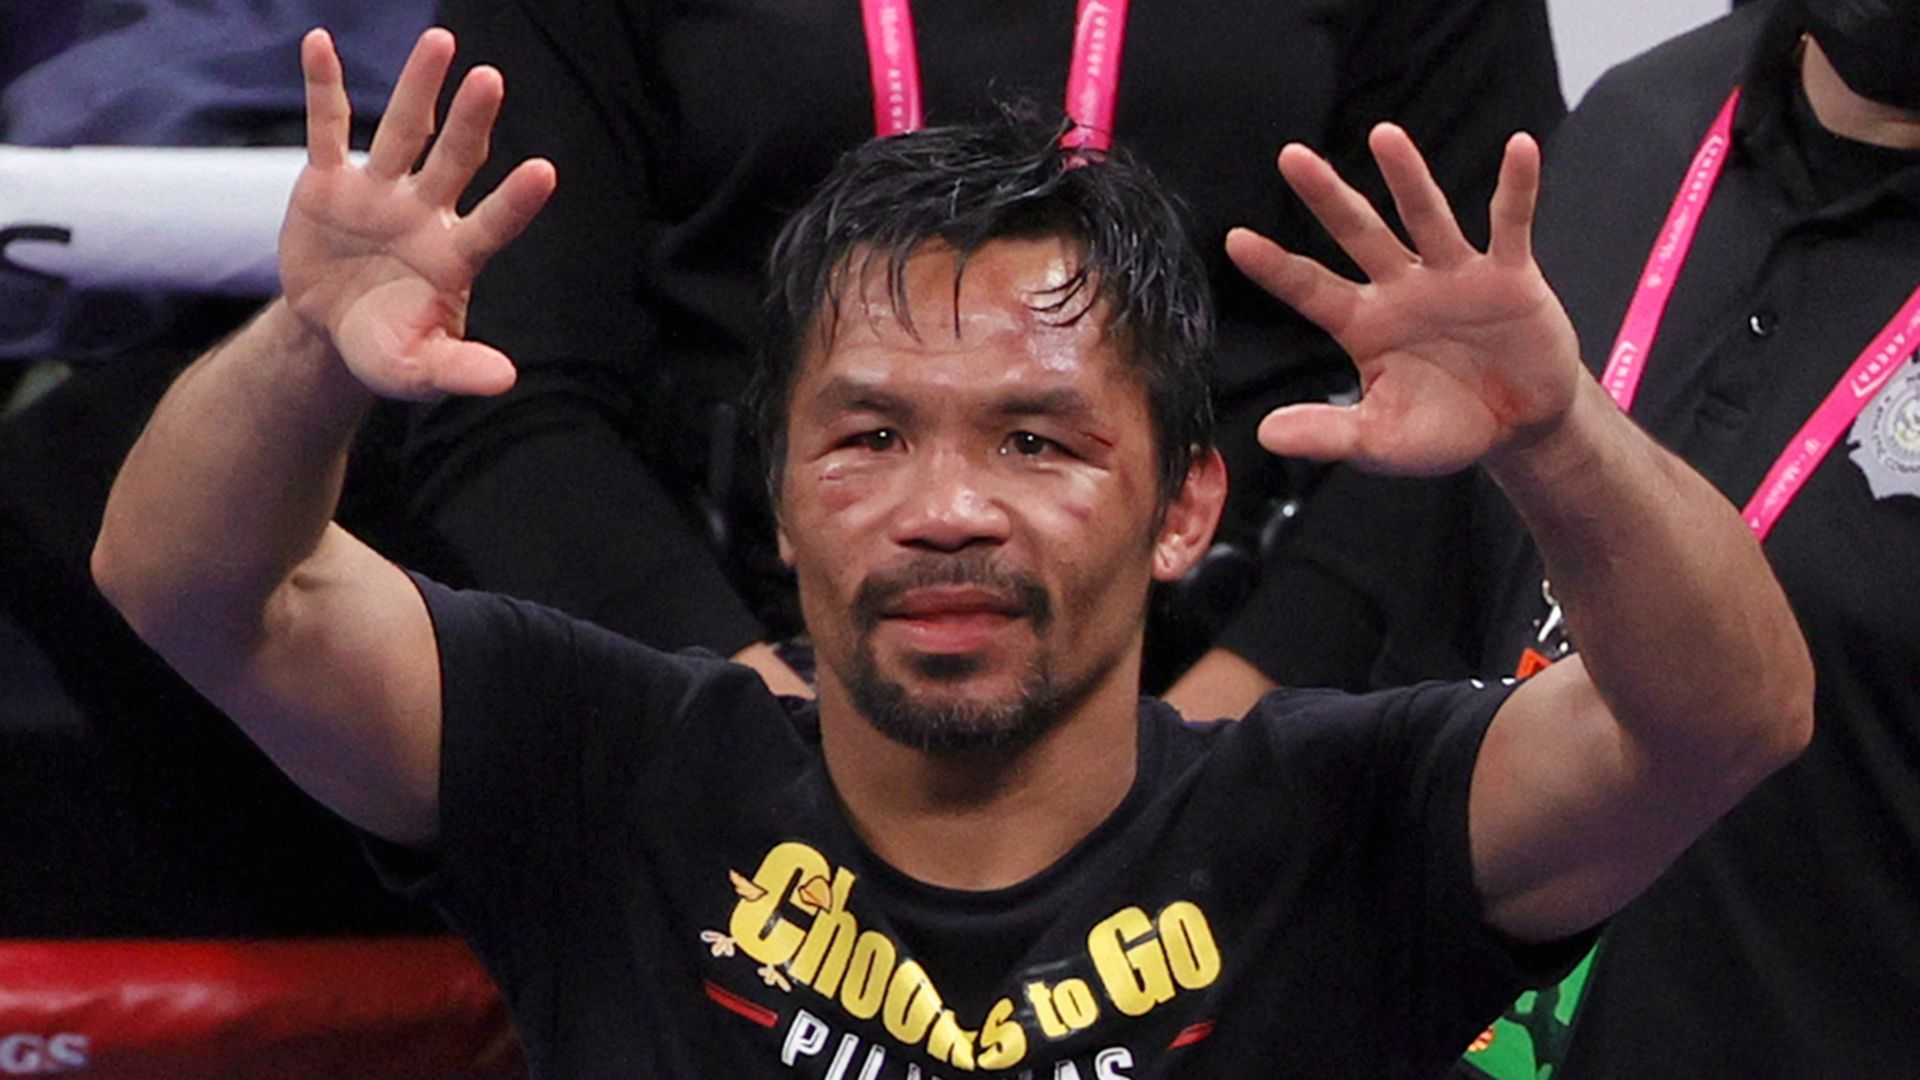  Manny Pacquiao gestures to fans after his WBA welterweight title fight against Yordenis Ugas at T-Mobile Arena on August 21, 2021 in Las Vegas, Nevada. 